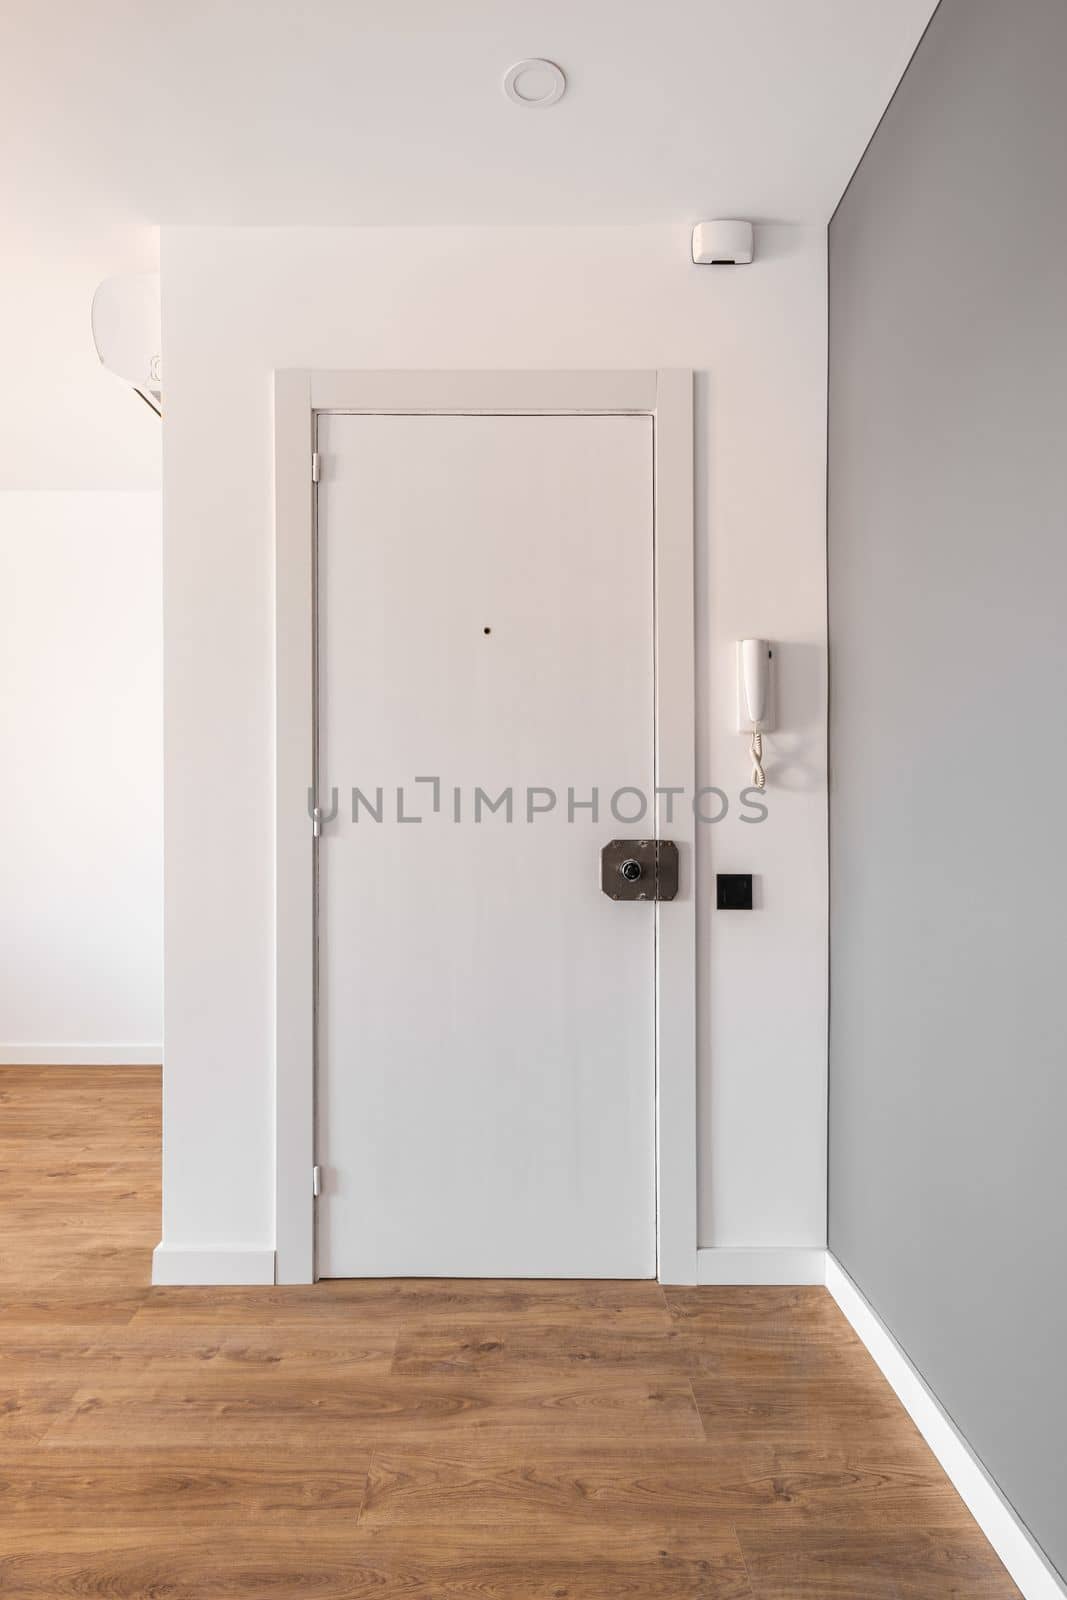 Entrance closed white wooden door to the apartment. Next to the door on the wall there is an intercom handset to allow guests to enter the entrance. On the door there is a key lock. by apavlin